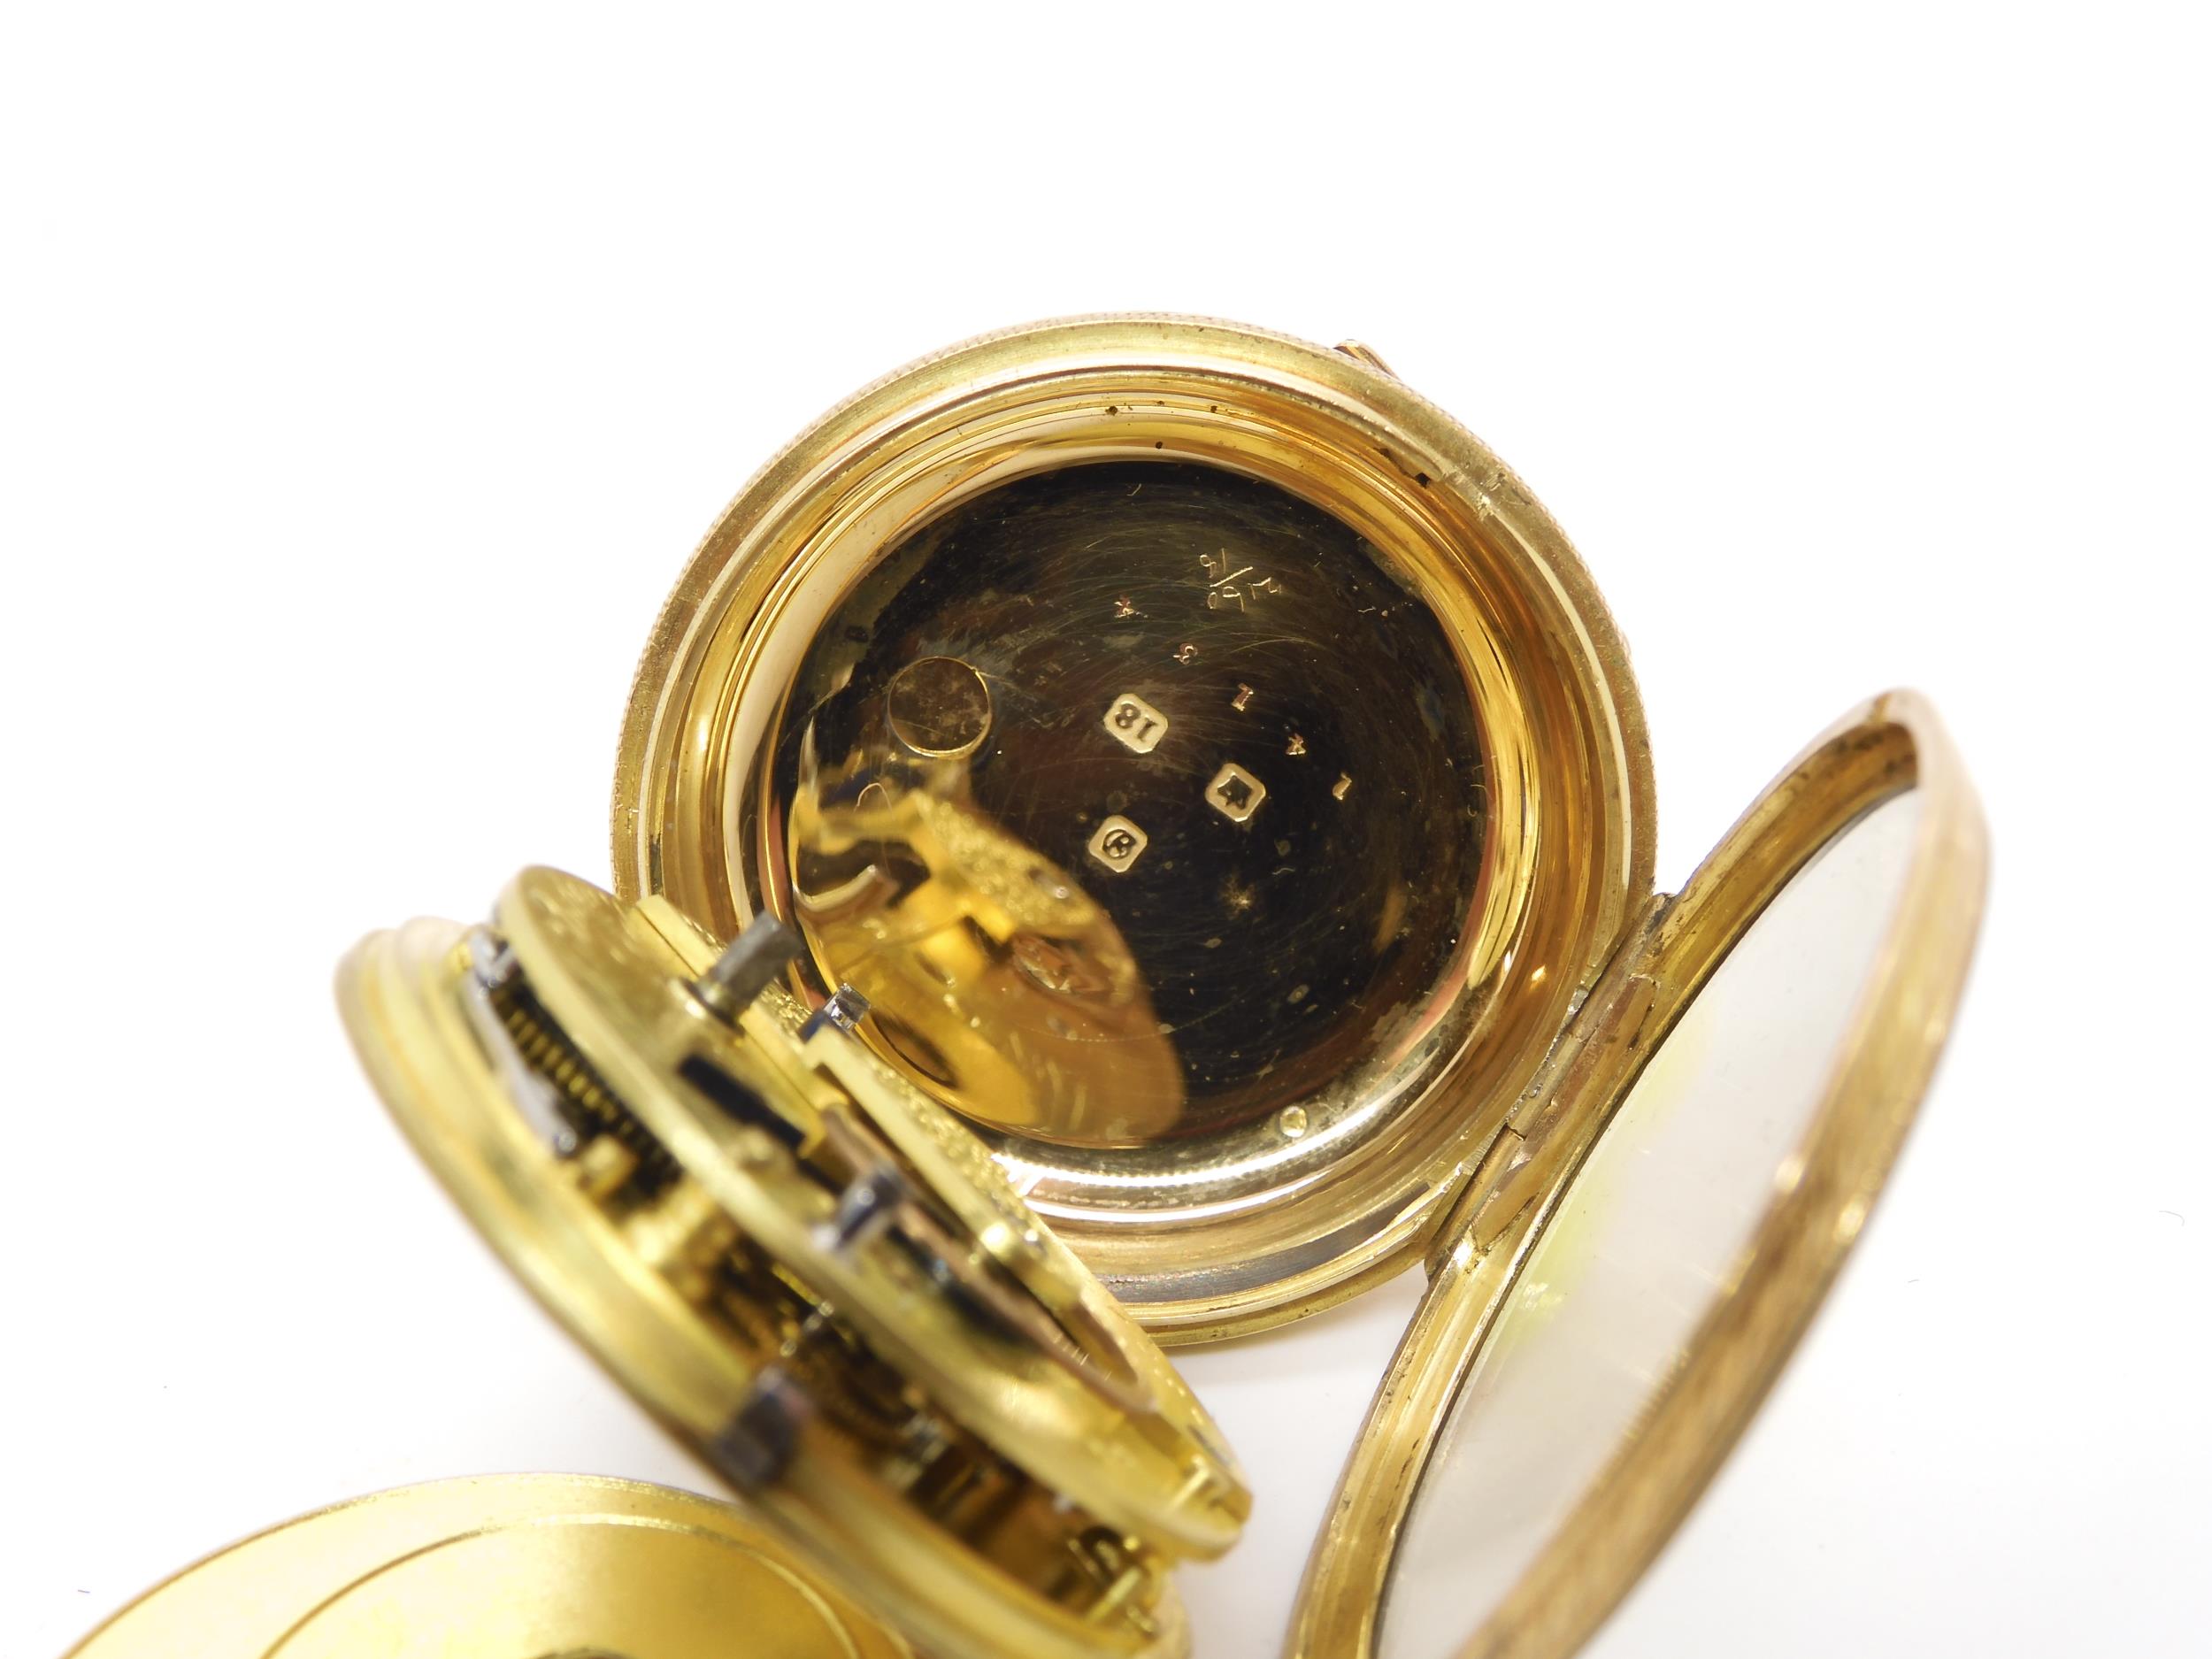 An 18ct gold open face fob watch with decorative gold dial, weight including mechanism 50.1gms, - Image 3 of 6